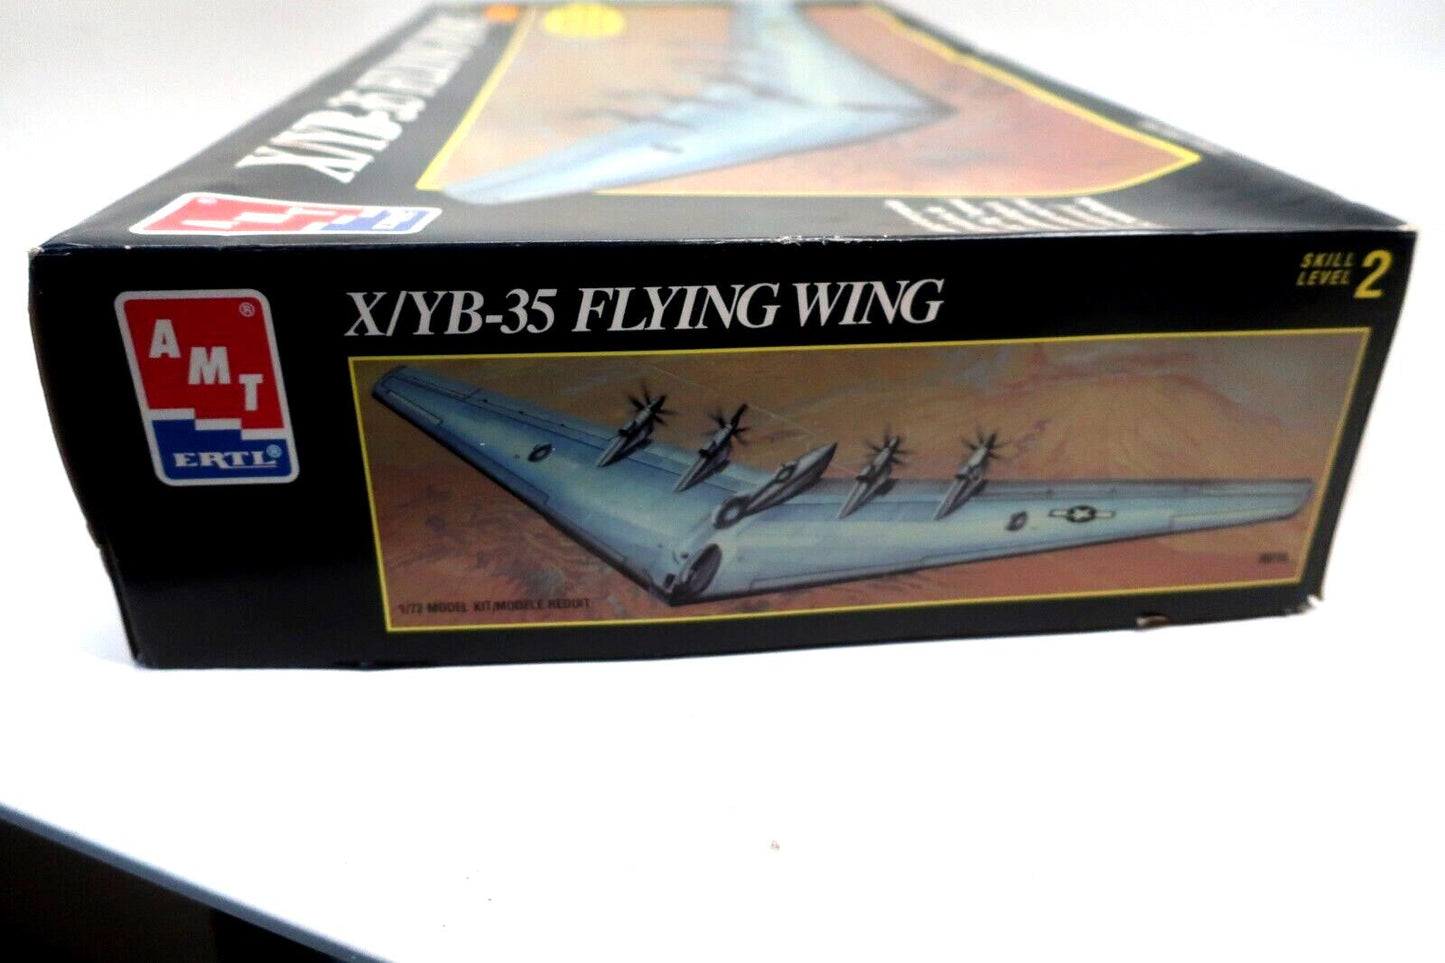 AMT ERTL 1/72 SCALE NORTHROP X/YB-35 FLYING WING- KIT #8615 - NEW OLD STOCK